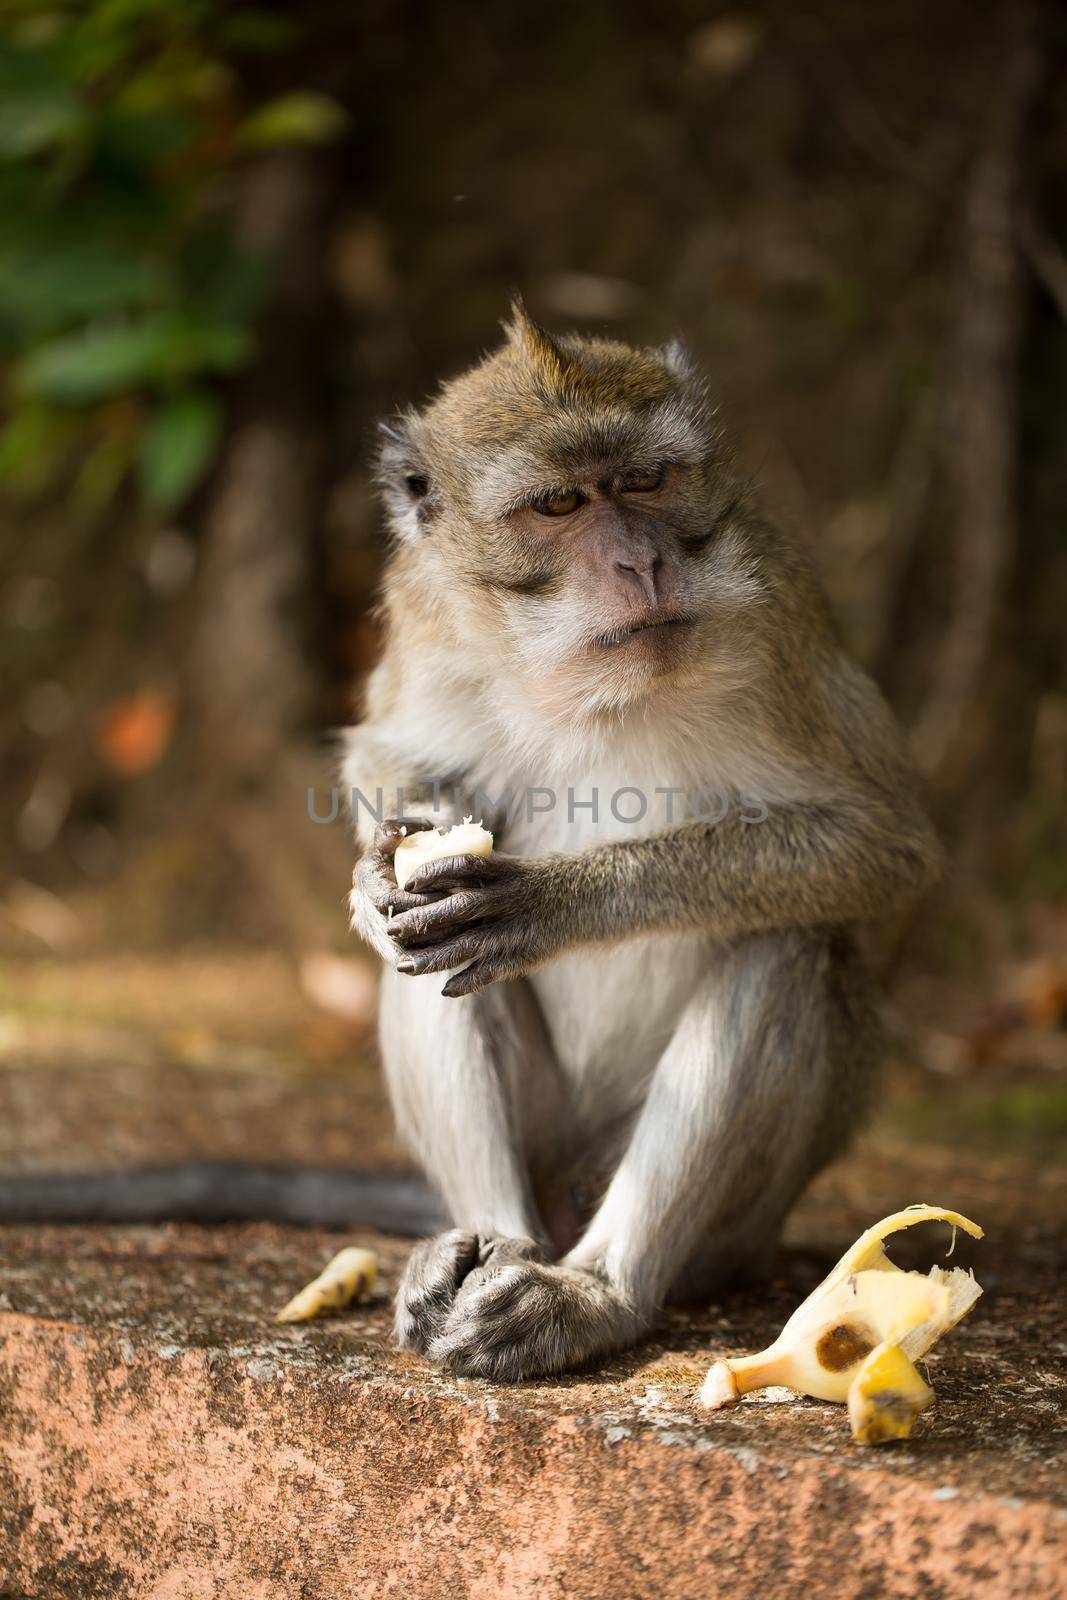 A monkey eats a banana in a natural environment park by StudioPeace